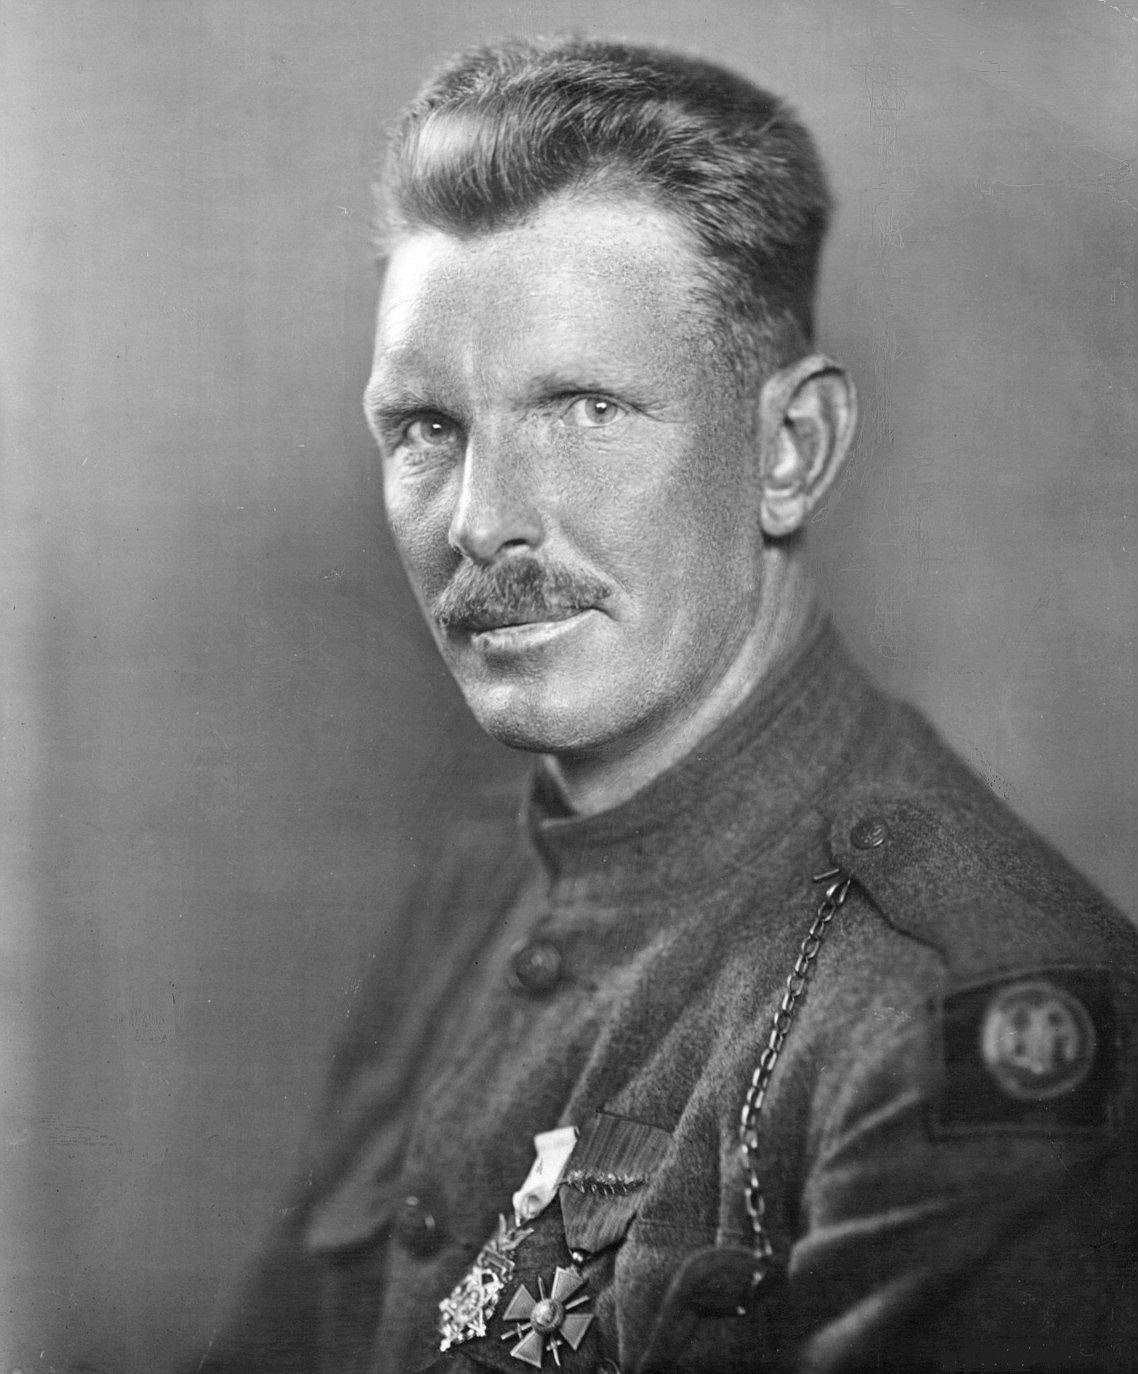 Sgt. Alvin C. York (1868-1964) Medal of Honor and Croix de Guerre recipient for heroic service in France in World War I.

PUBLIC DOMAIN